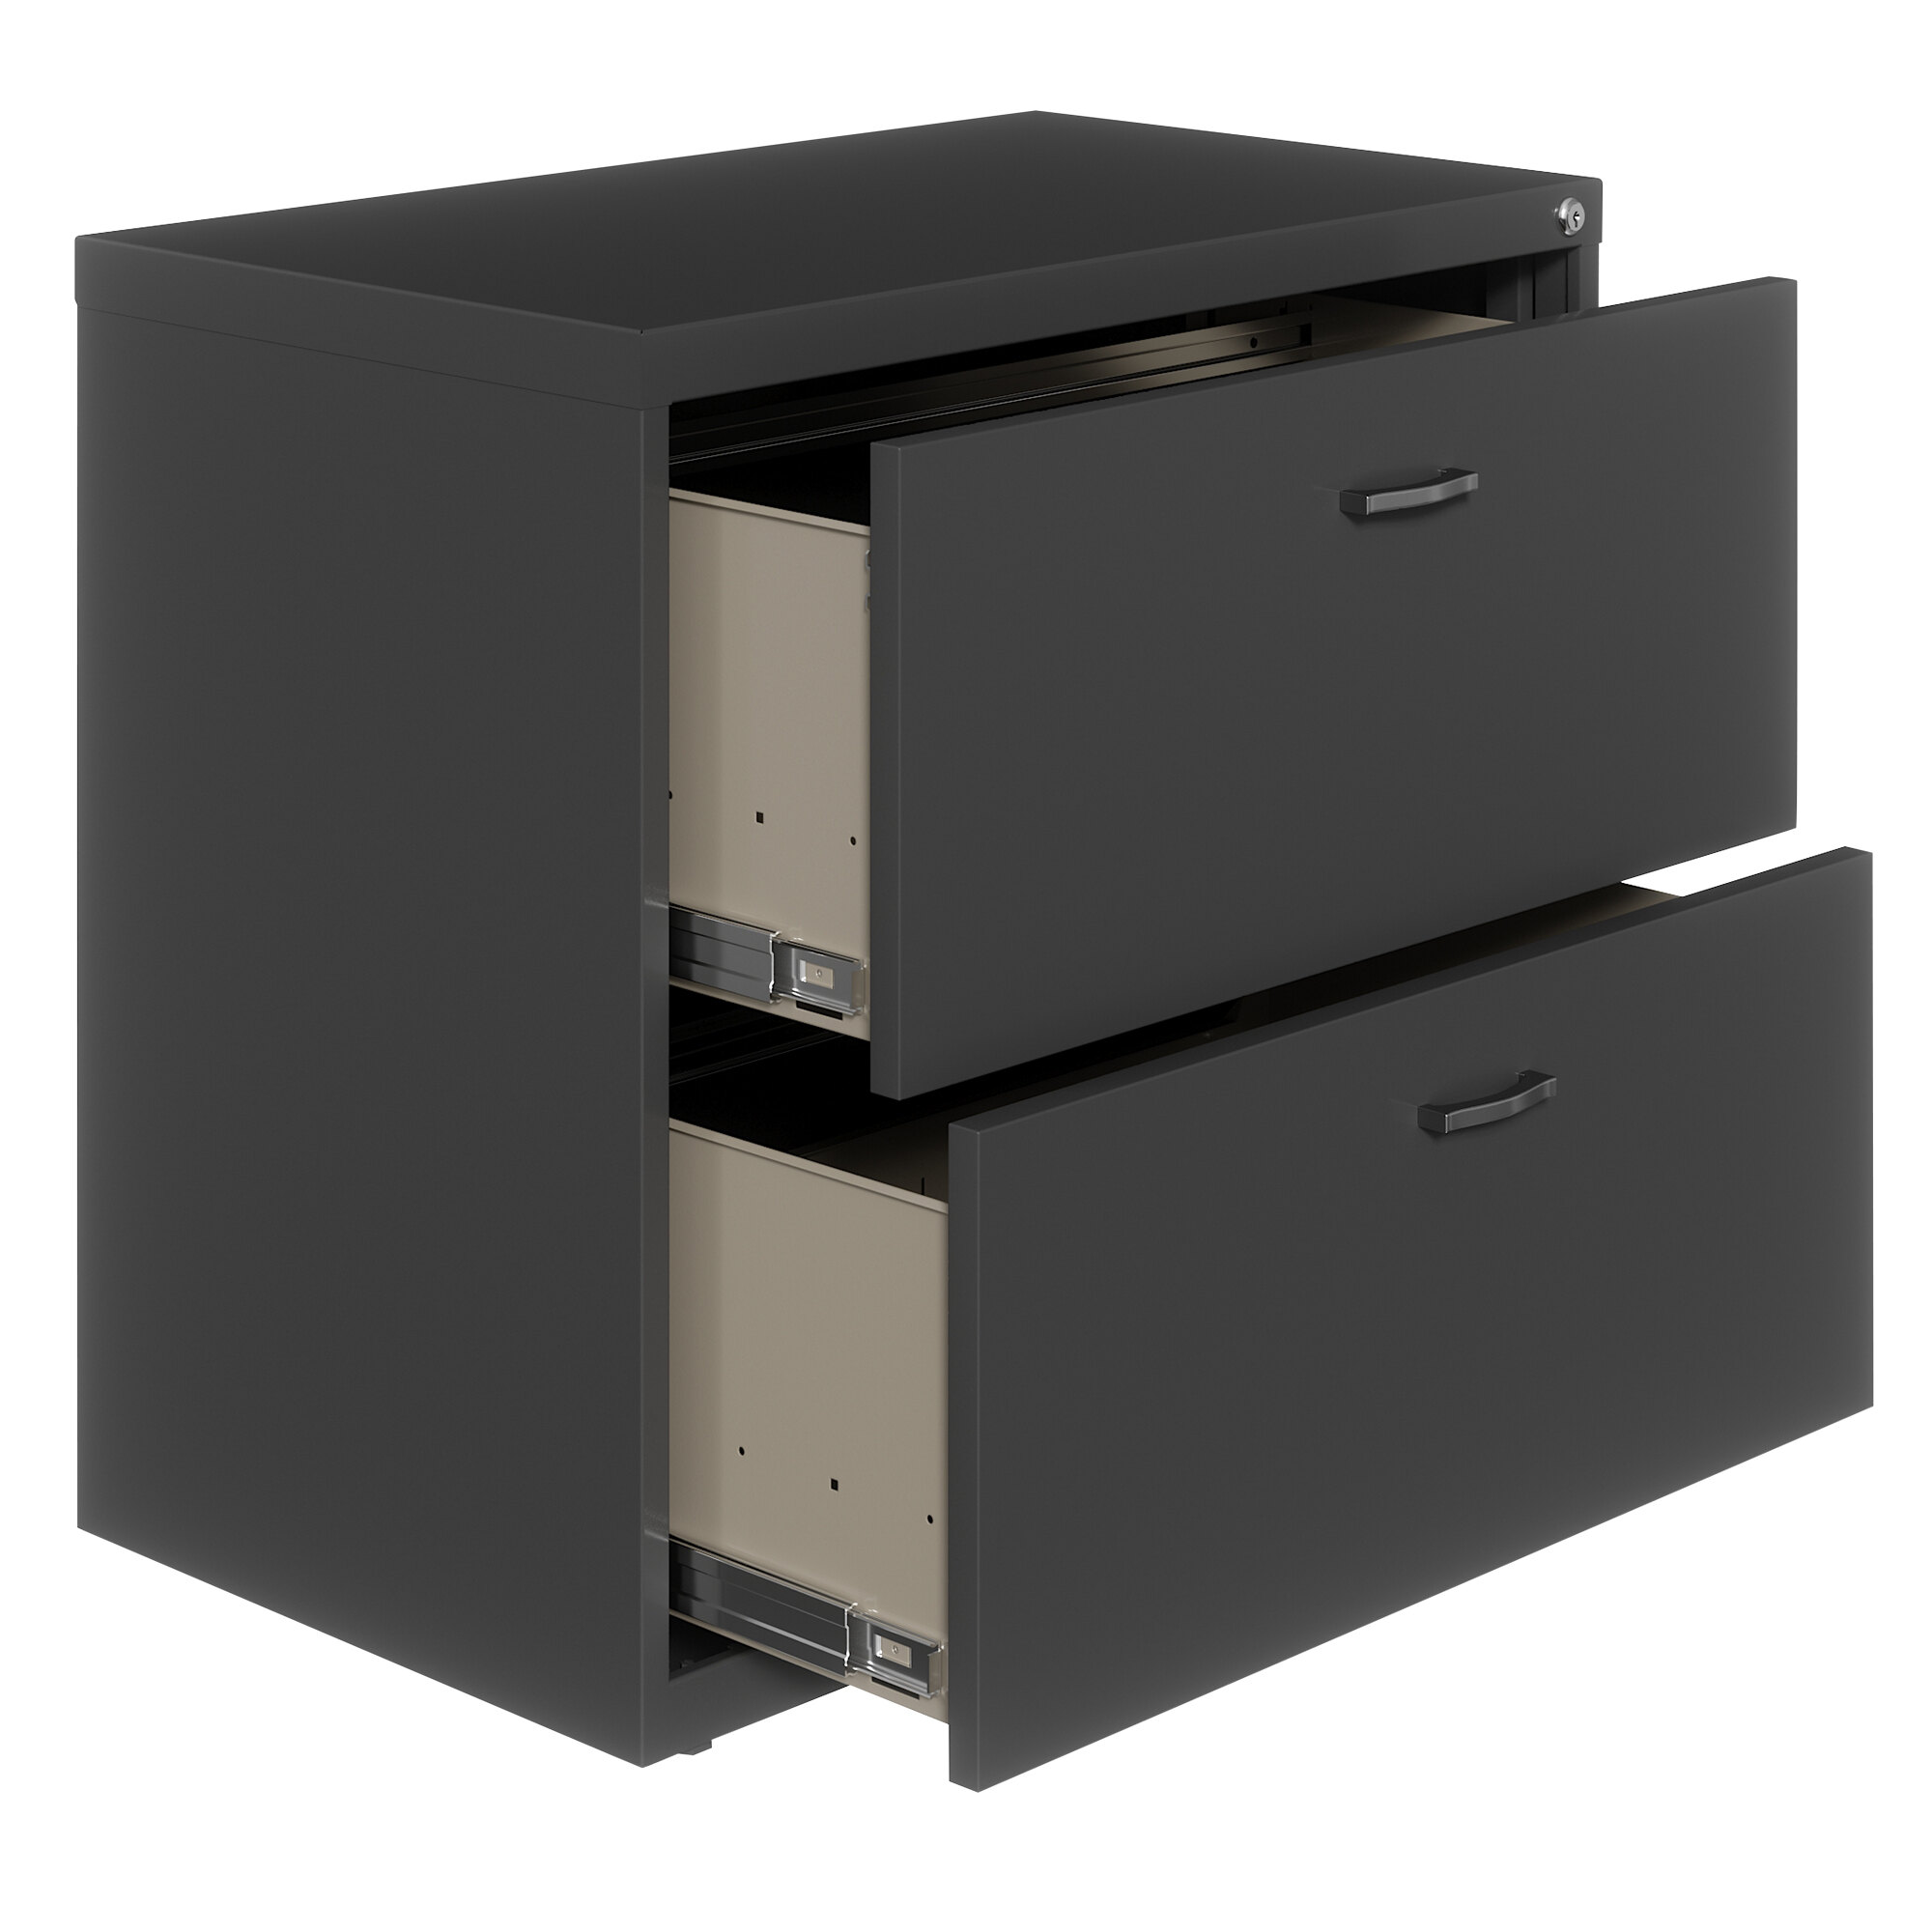 Hirsh Industries 23925 Space Solutions SOHO Charcoal Two